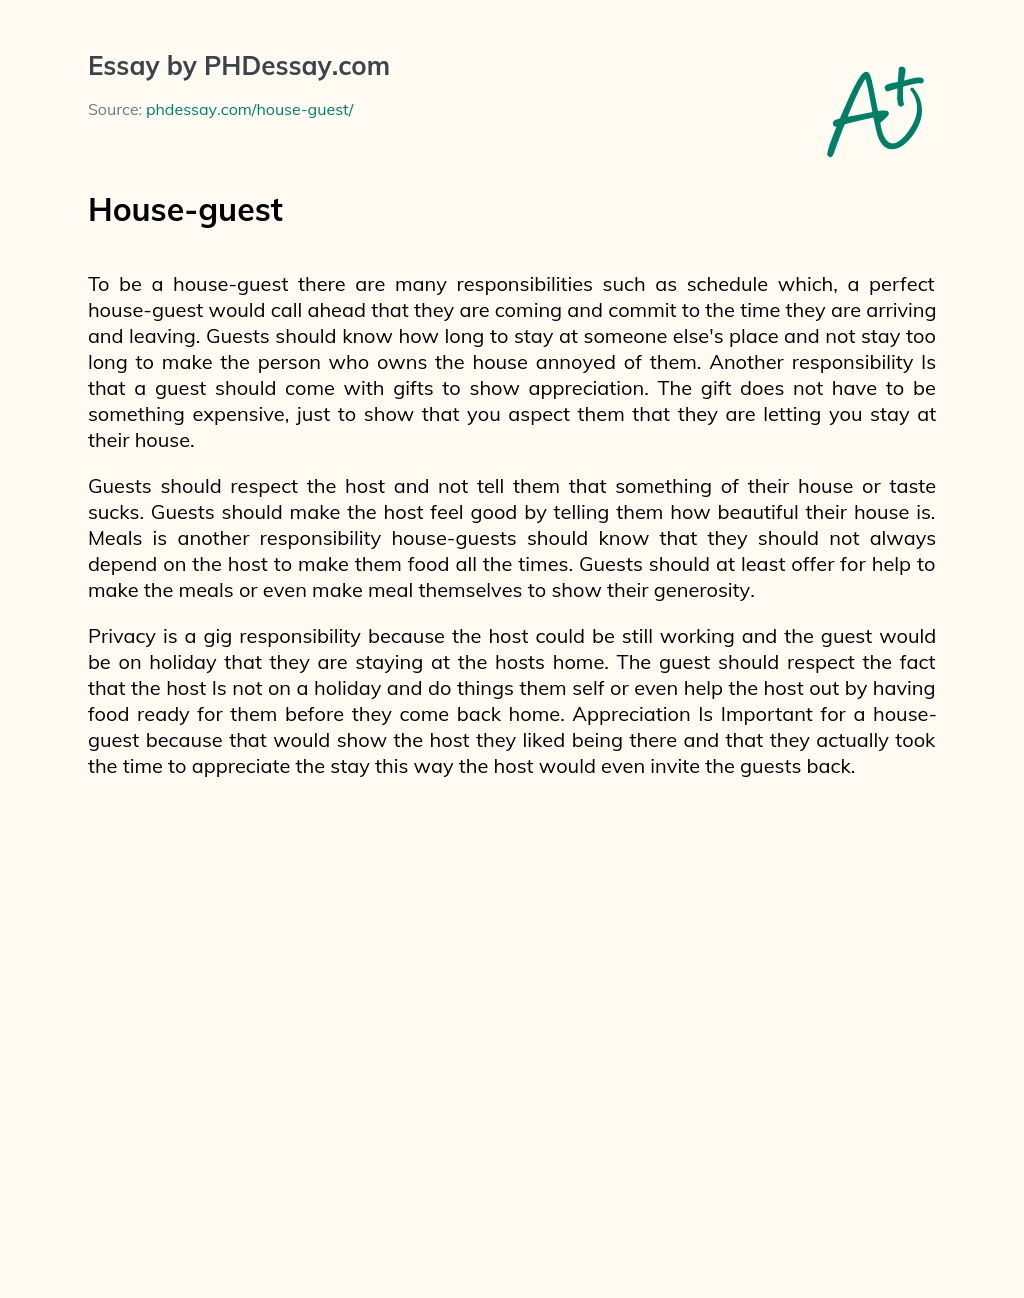 House-guest essay